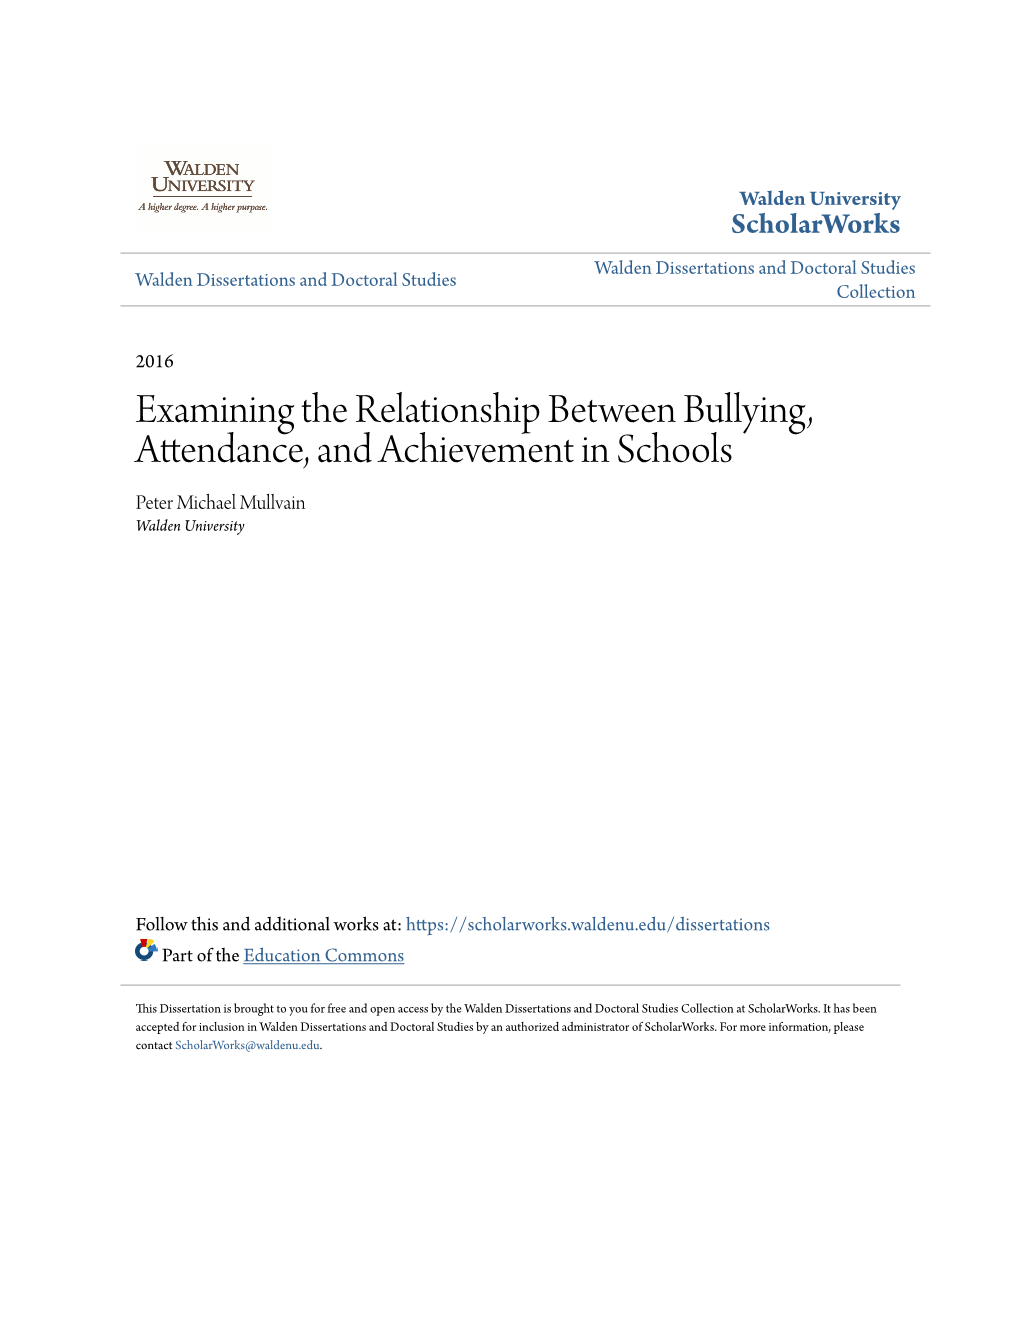 Examining the Relationship Between Bullying, Attendance, and Achievement in Schools Peter Michael Mullvain Walden University